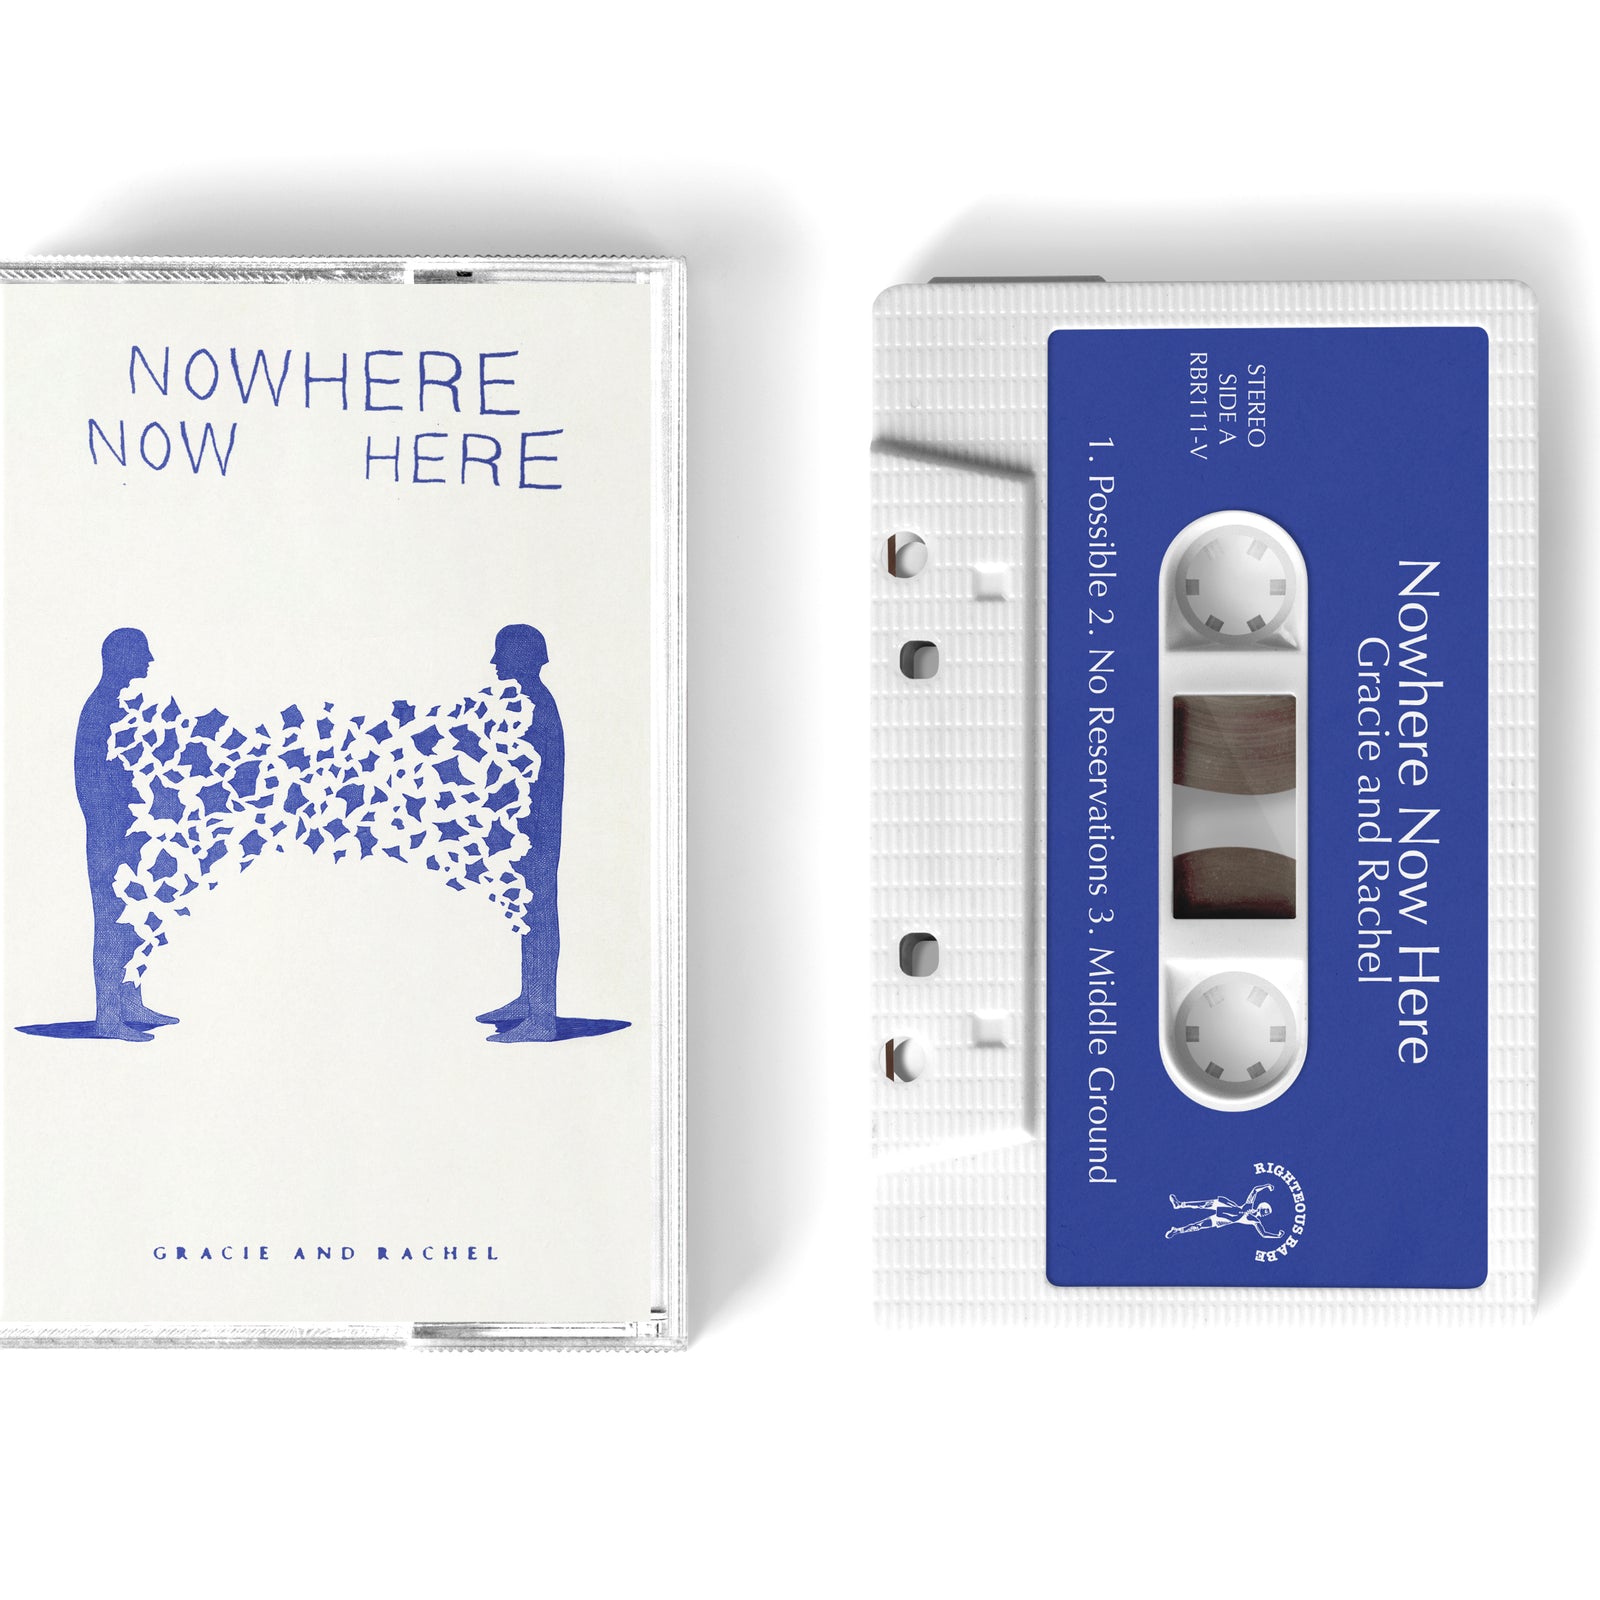 Gracie and Rachel - Nowhere Now Here (EP)